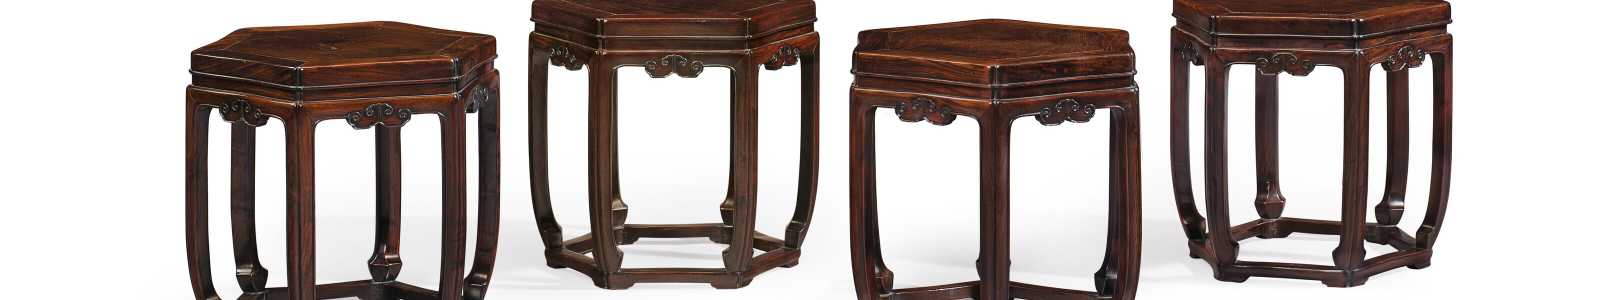 A Connoisseur's Studio - The Cissy and Robert Tang Collection of Chinese Classical Furniture